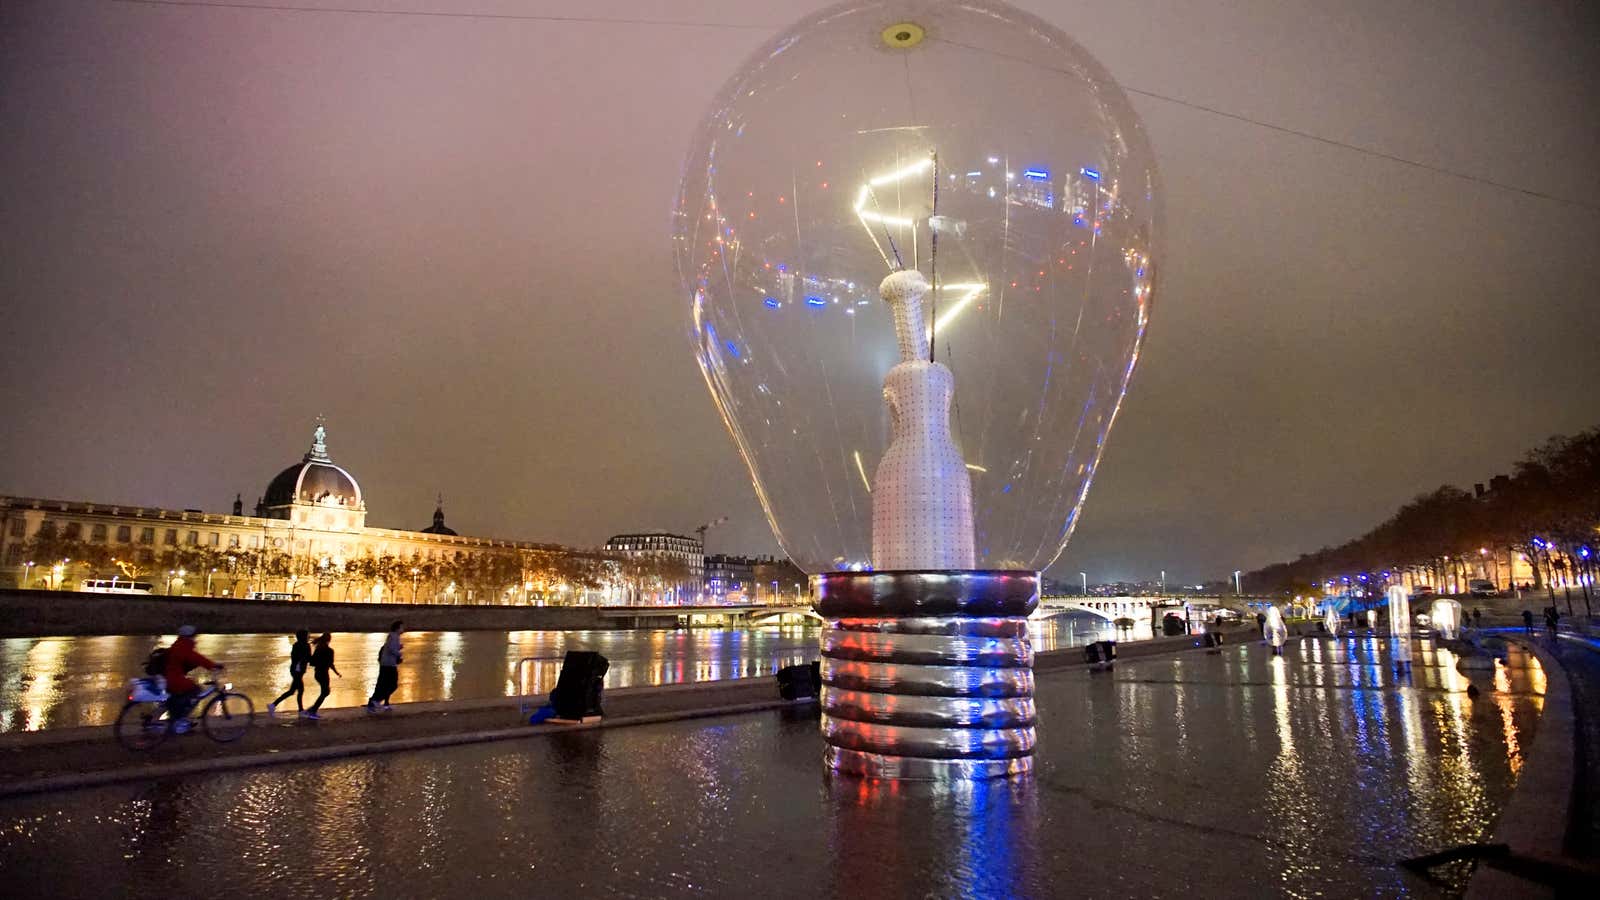 View of a giant incandescent light bulb in central Lyon